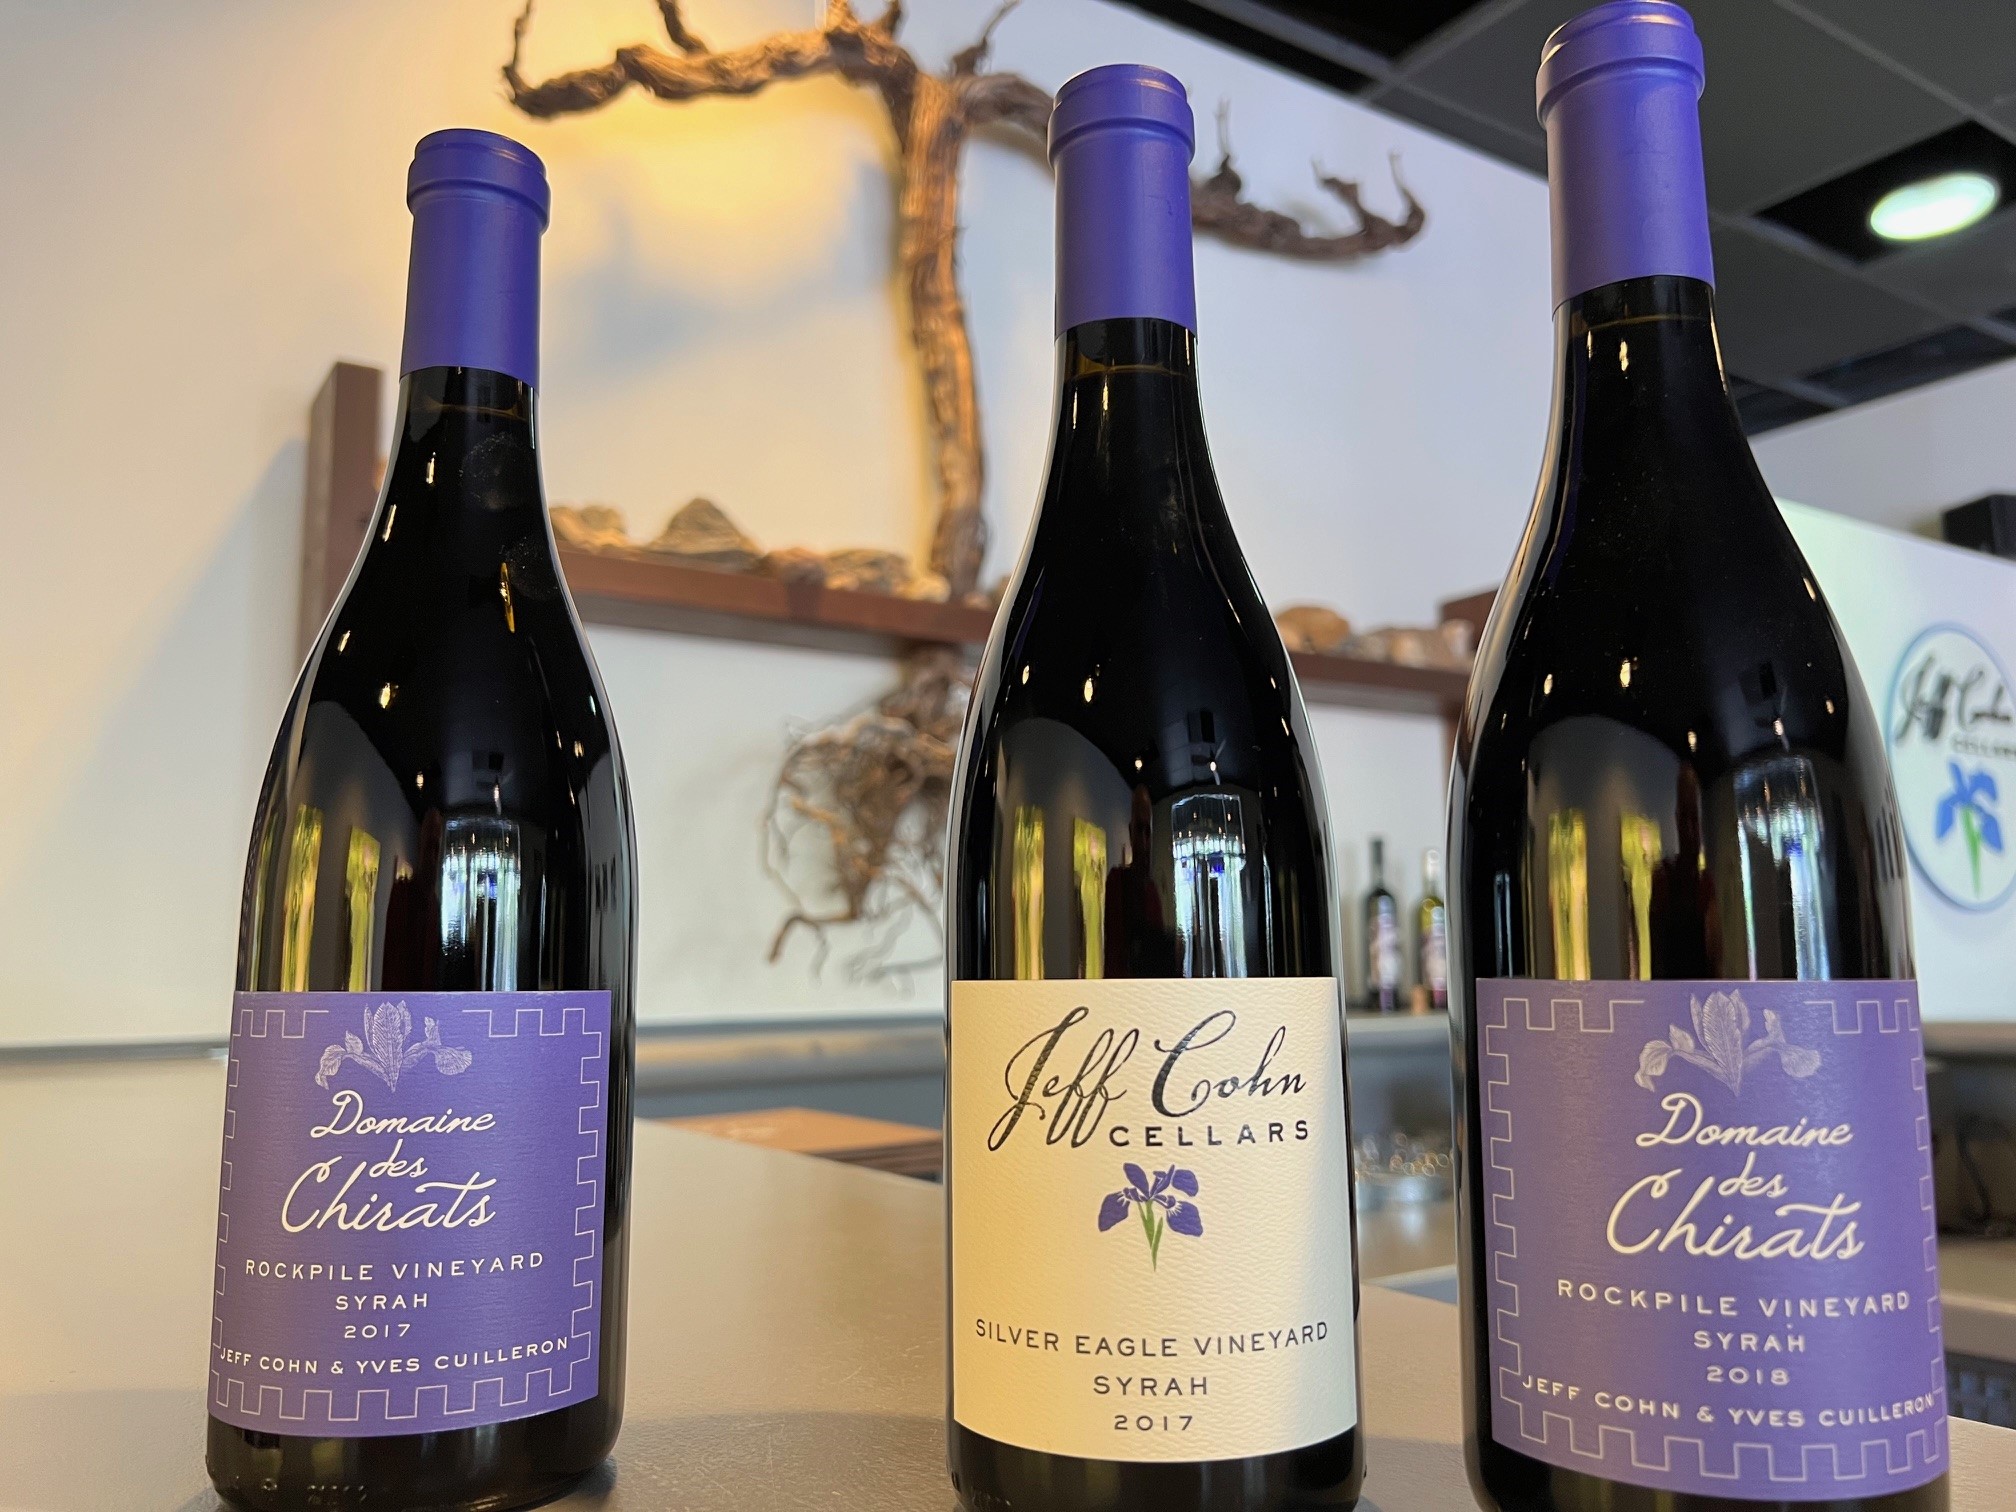 Bottles of Jeff Cohn Cellars Wines domaine des Chirats Syrah in the Tasting Room with vine in the background